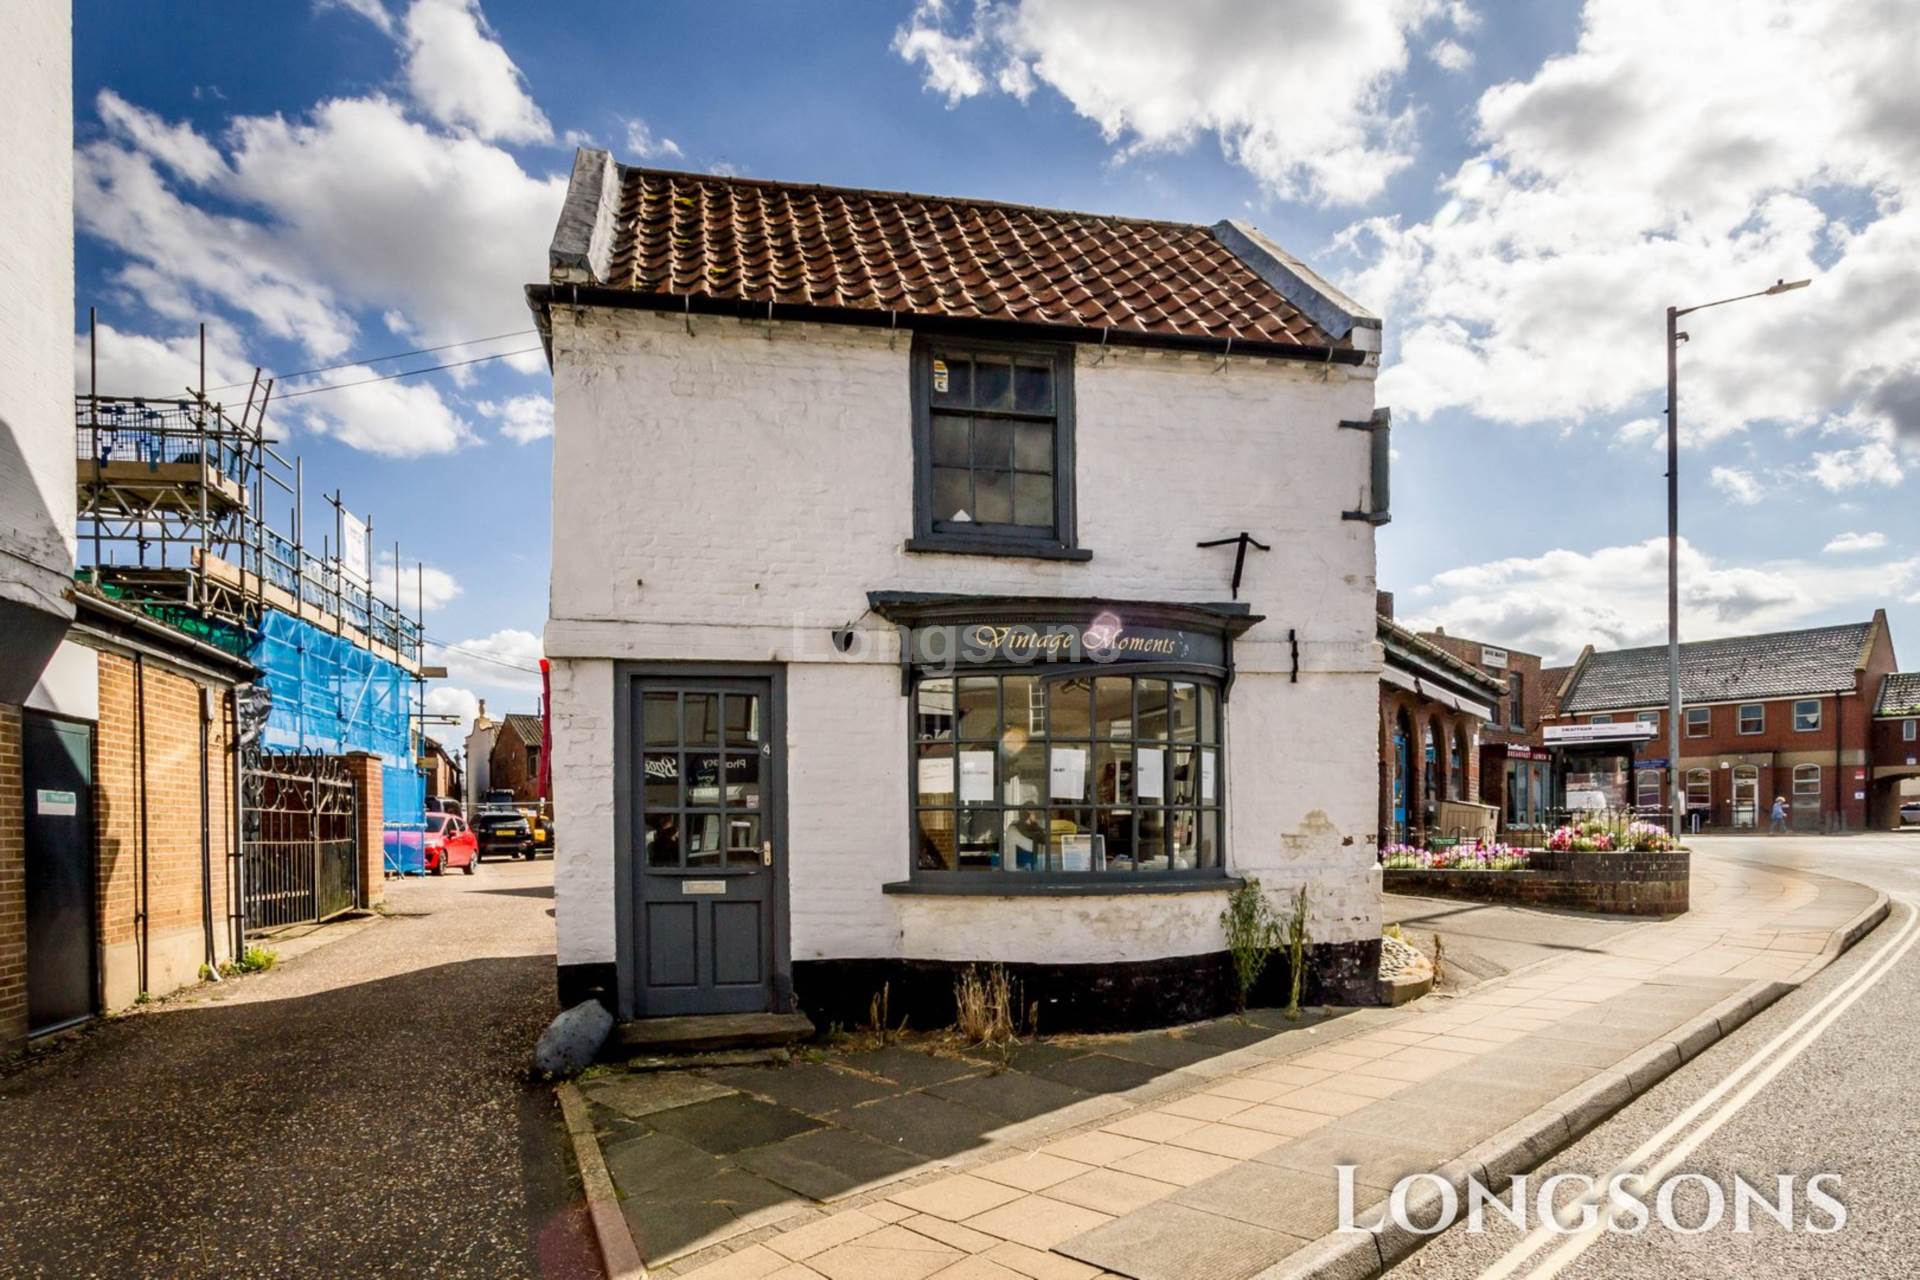 0 bed Retail Property (High Street) for rent in Swaffham. From Longsons - Swaffham